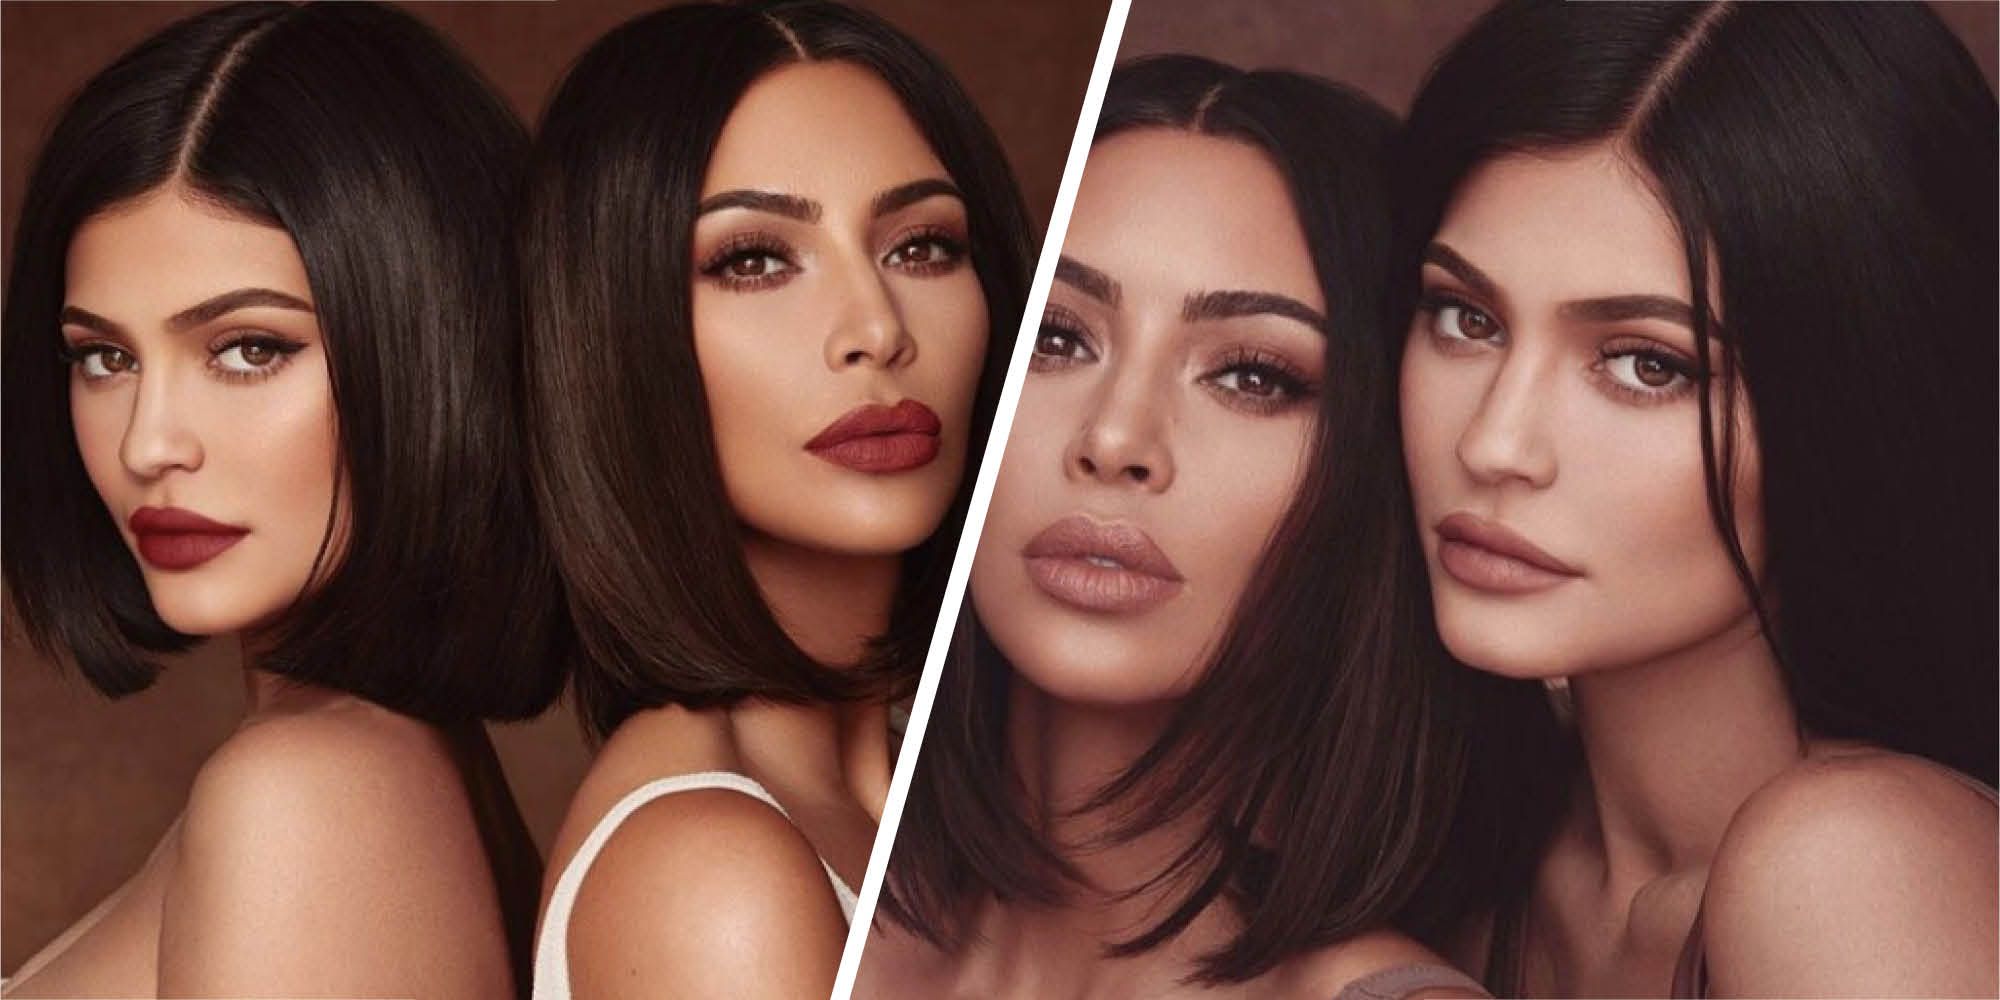 Kylie Jenner and Kim Kardashian are Launching Their New Lipstick